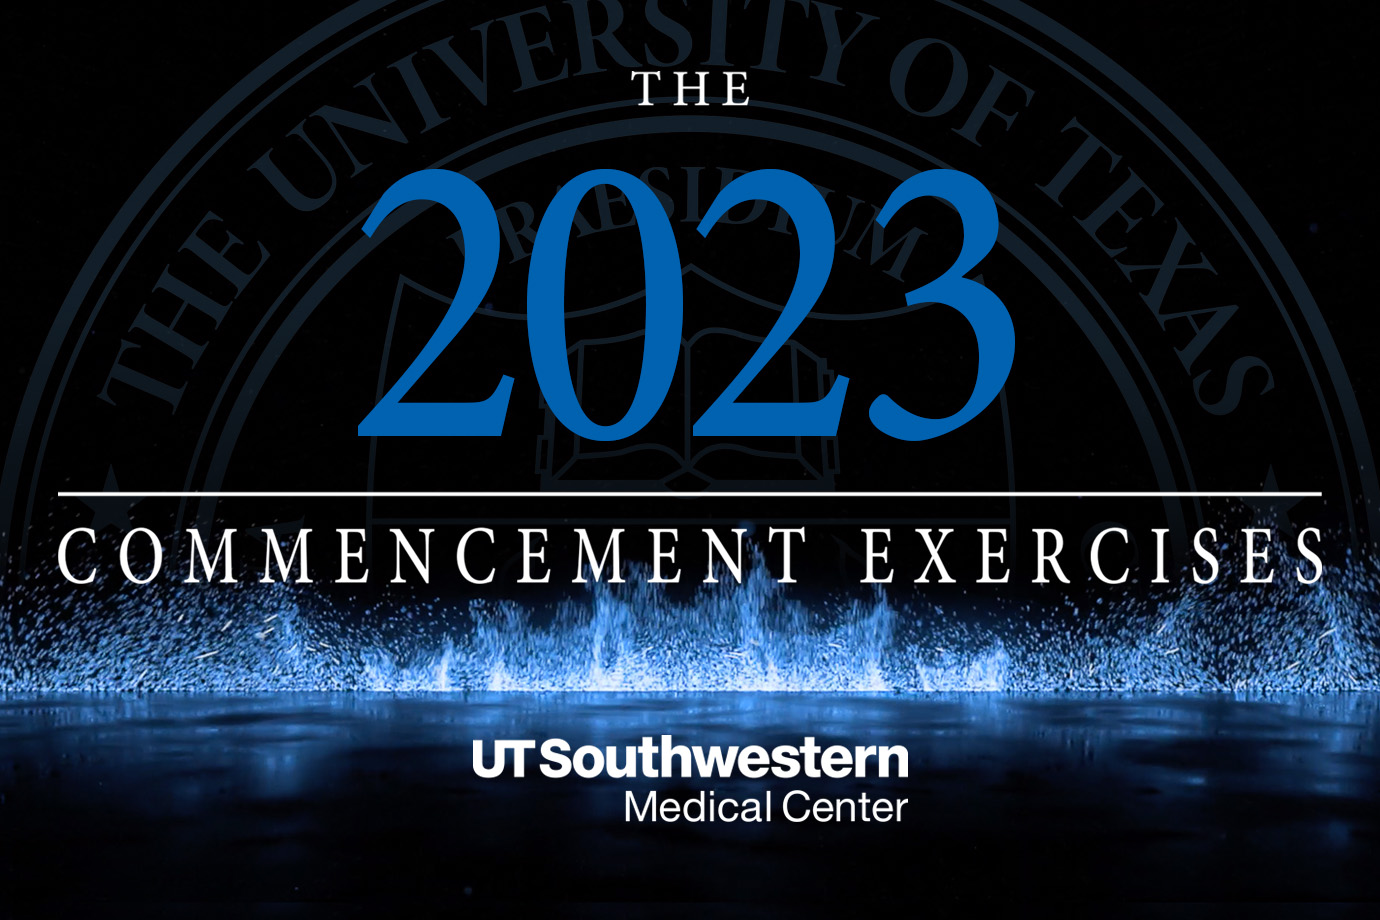 Commencement 2023,Thursday, May 18, at 7 p.m